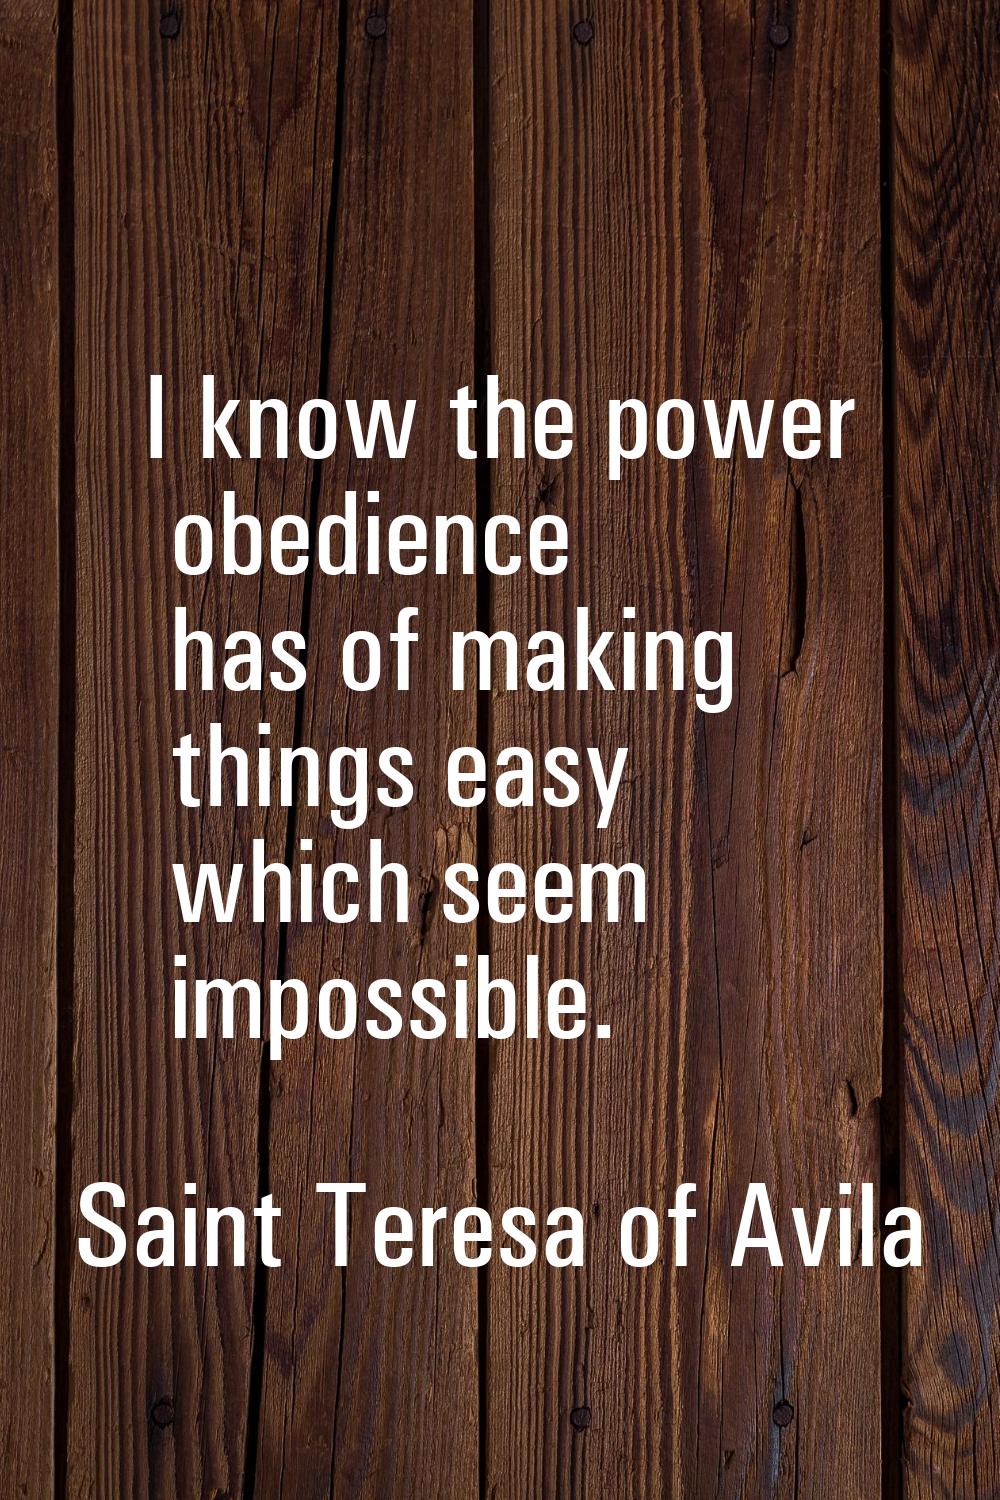 I know the power obedience has of making things easy which seem impossible.